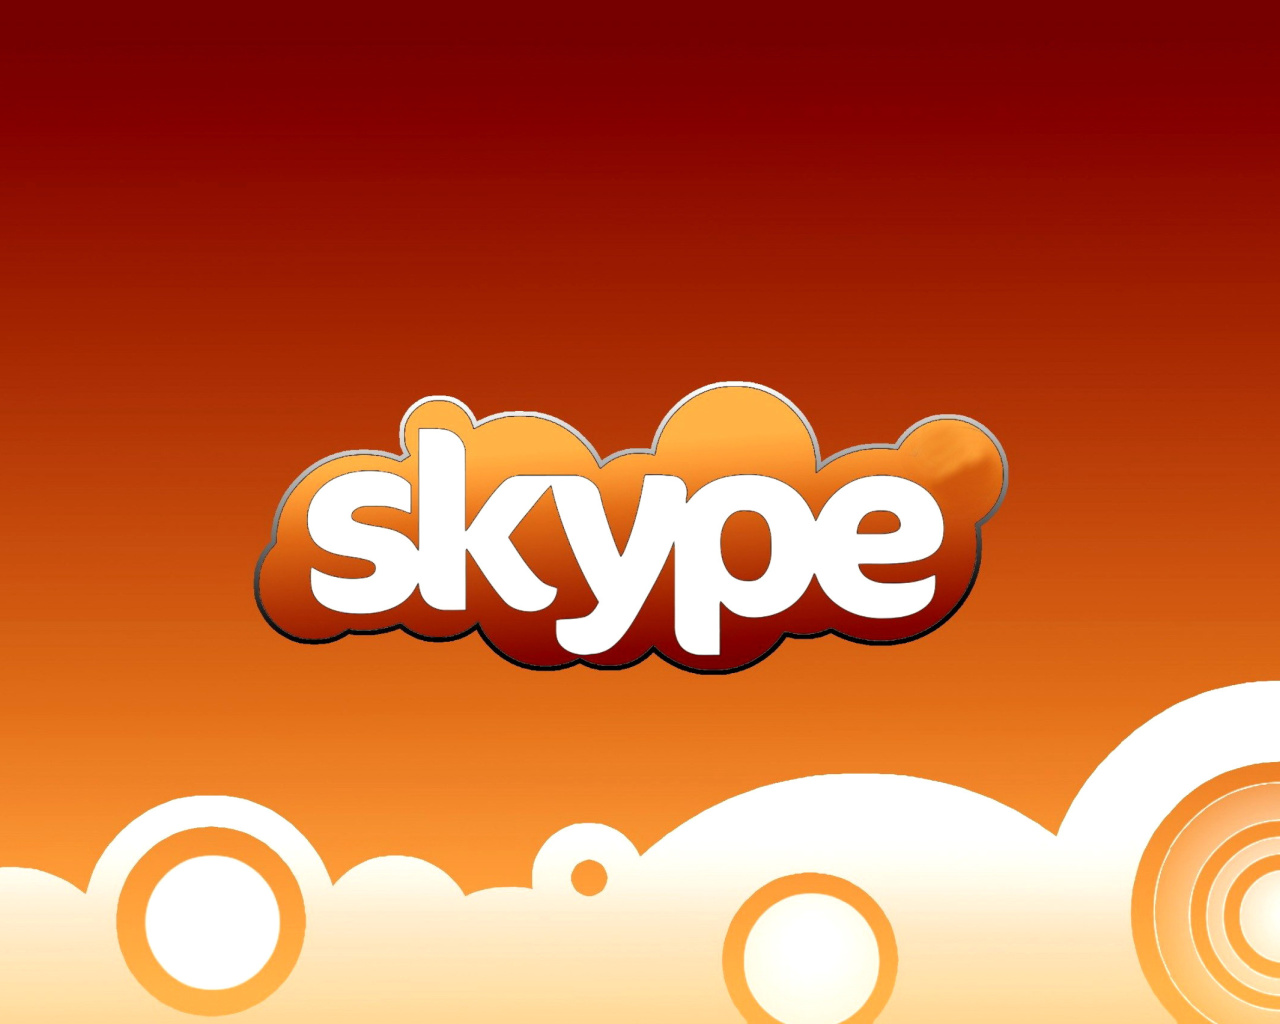 Skype for calls and chat wallpaper 1280x1024